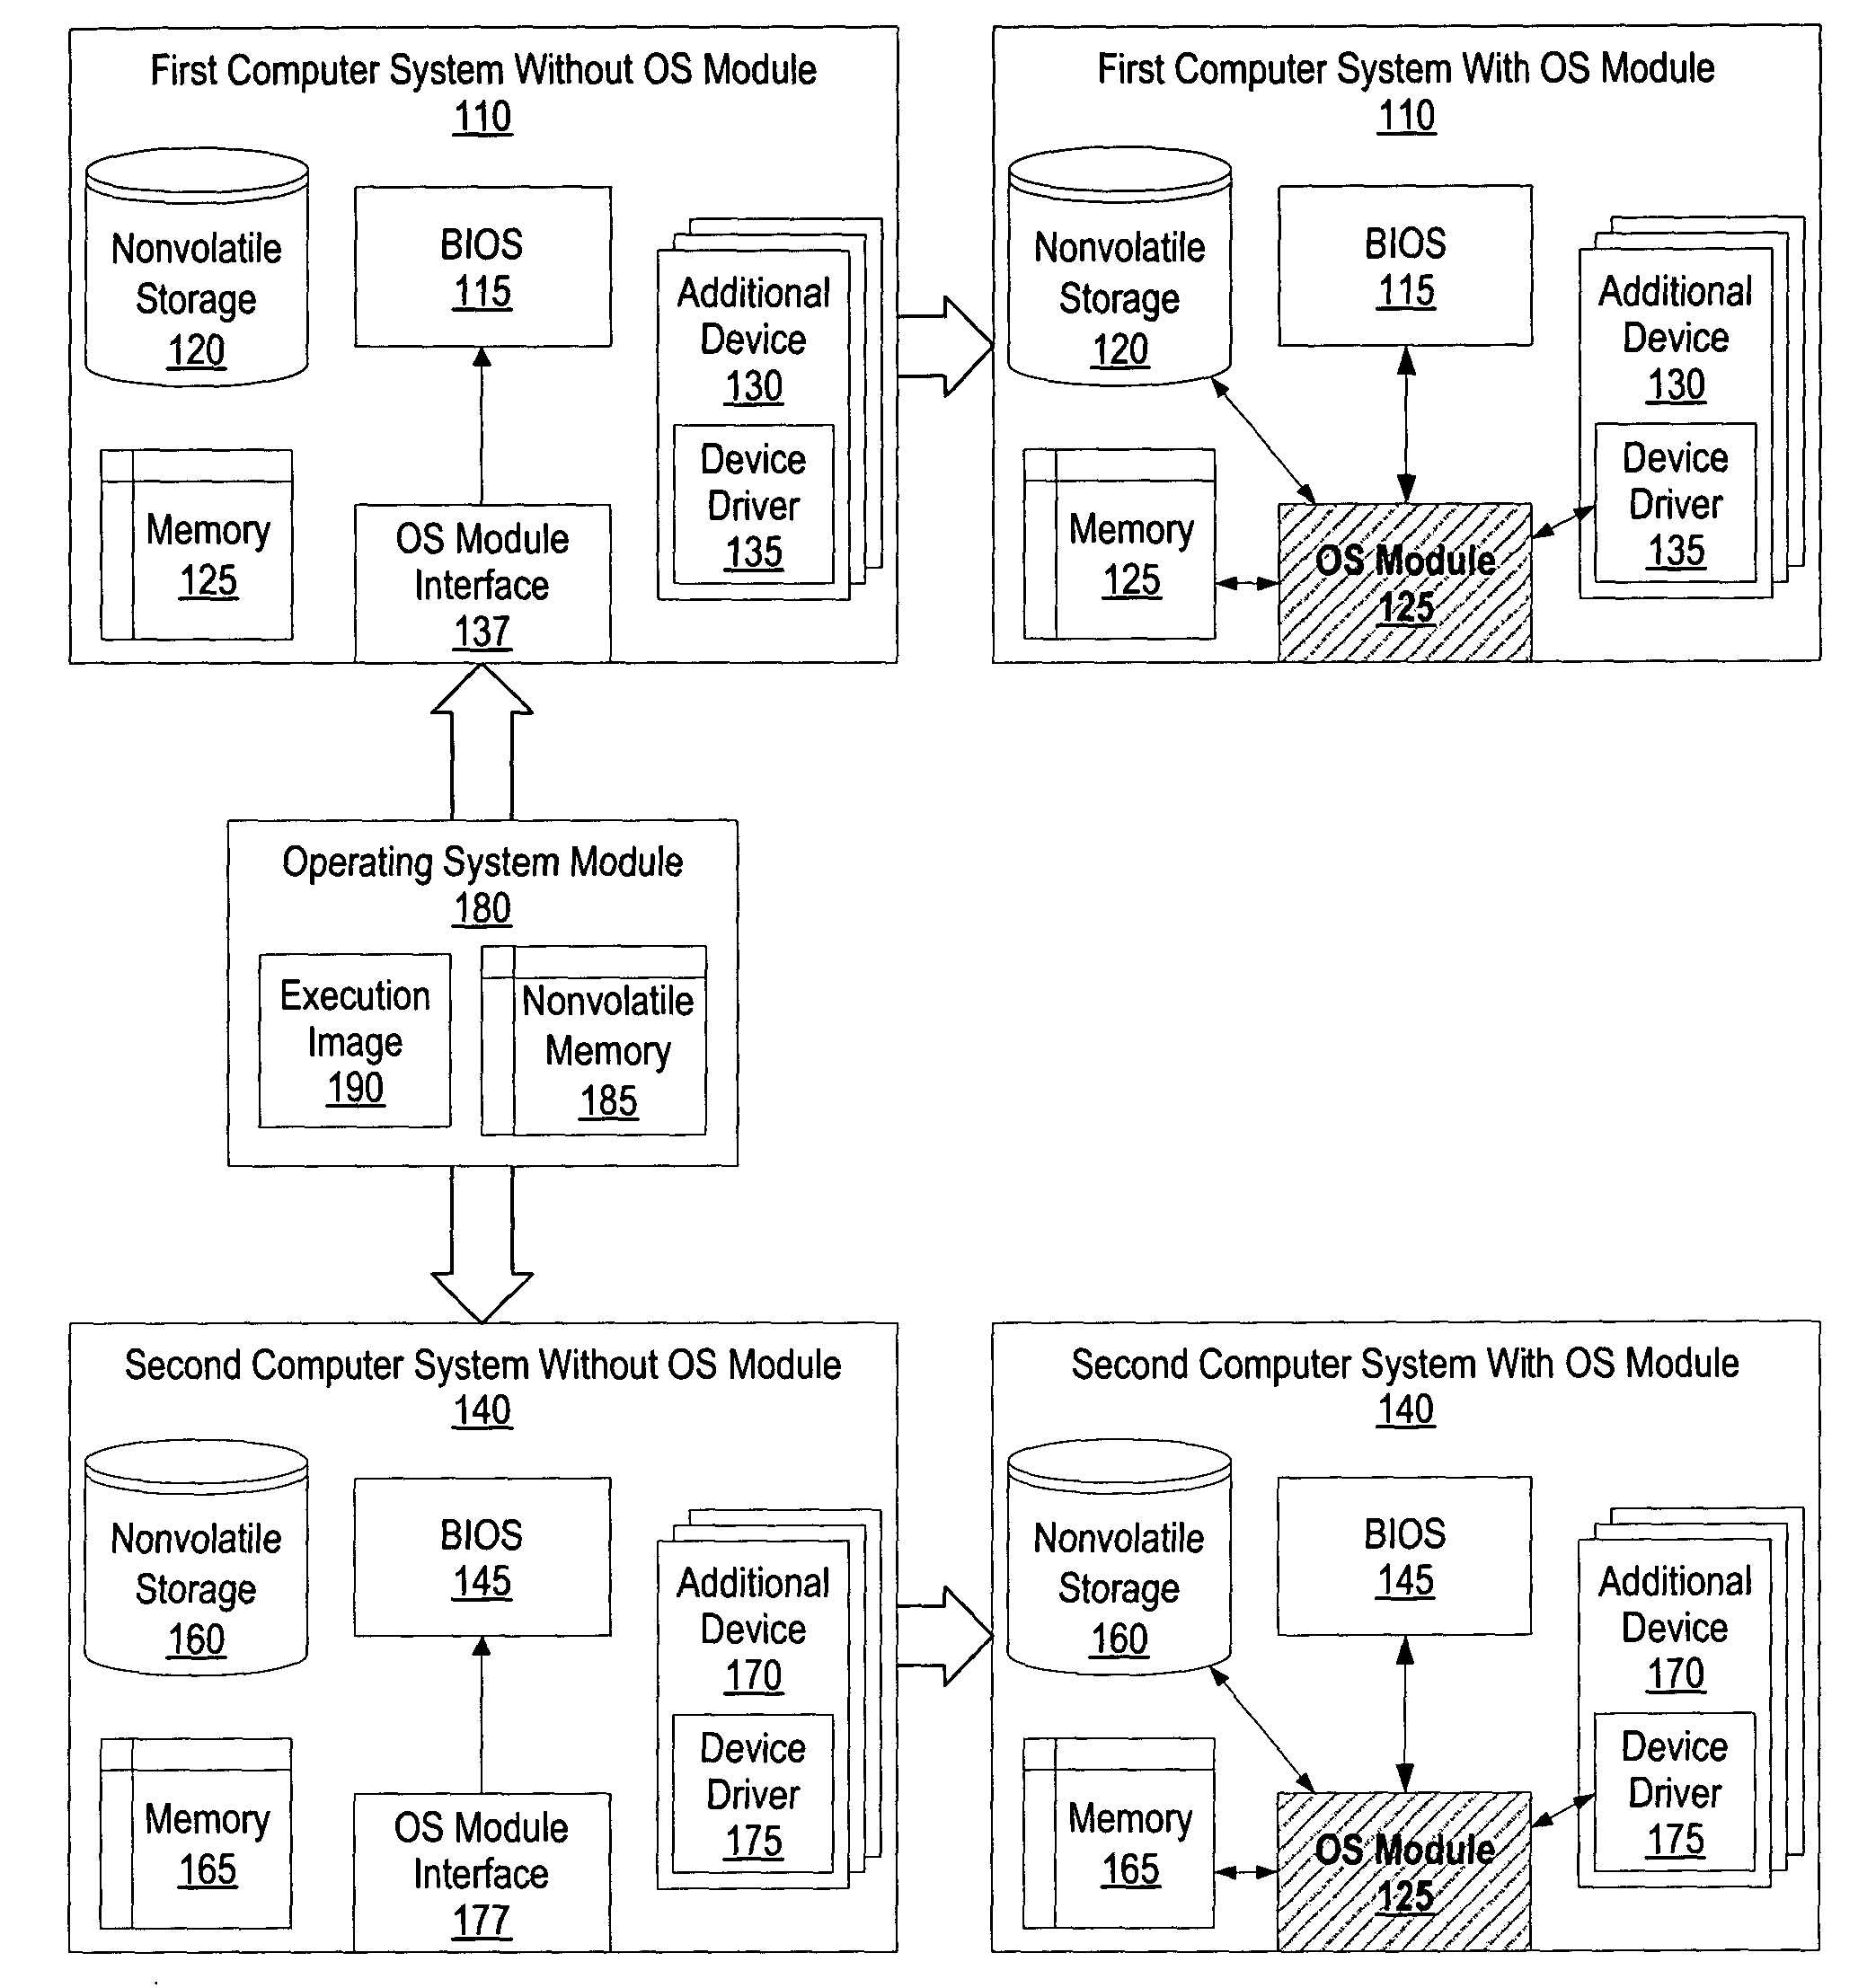 System and method for hibernating application state data on removable module